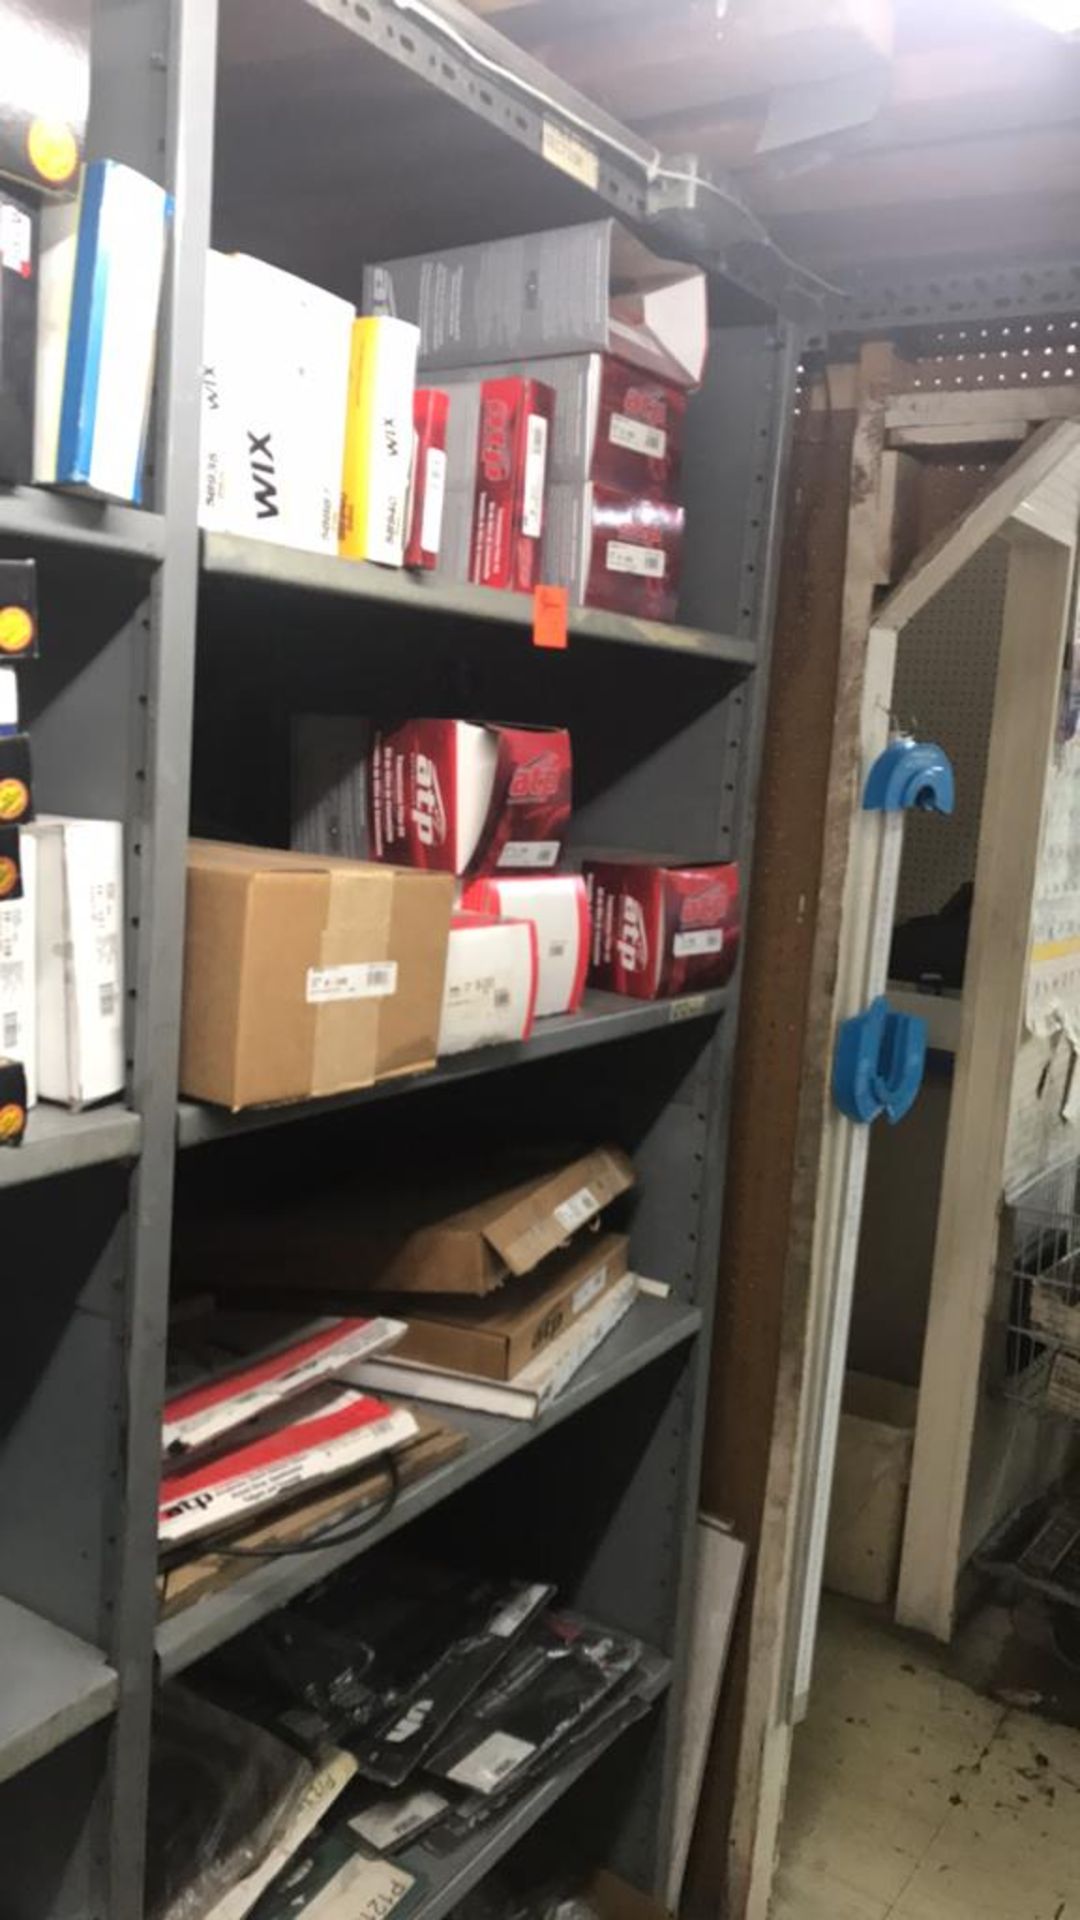 (5) Shelves of MiscTrans Kits, Fly Wheels and Detent Cables